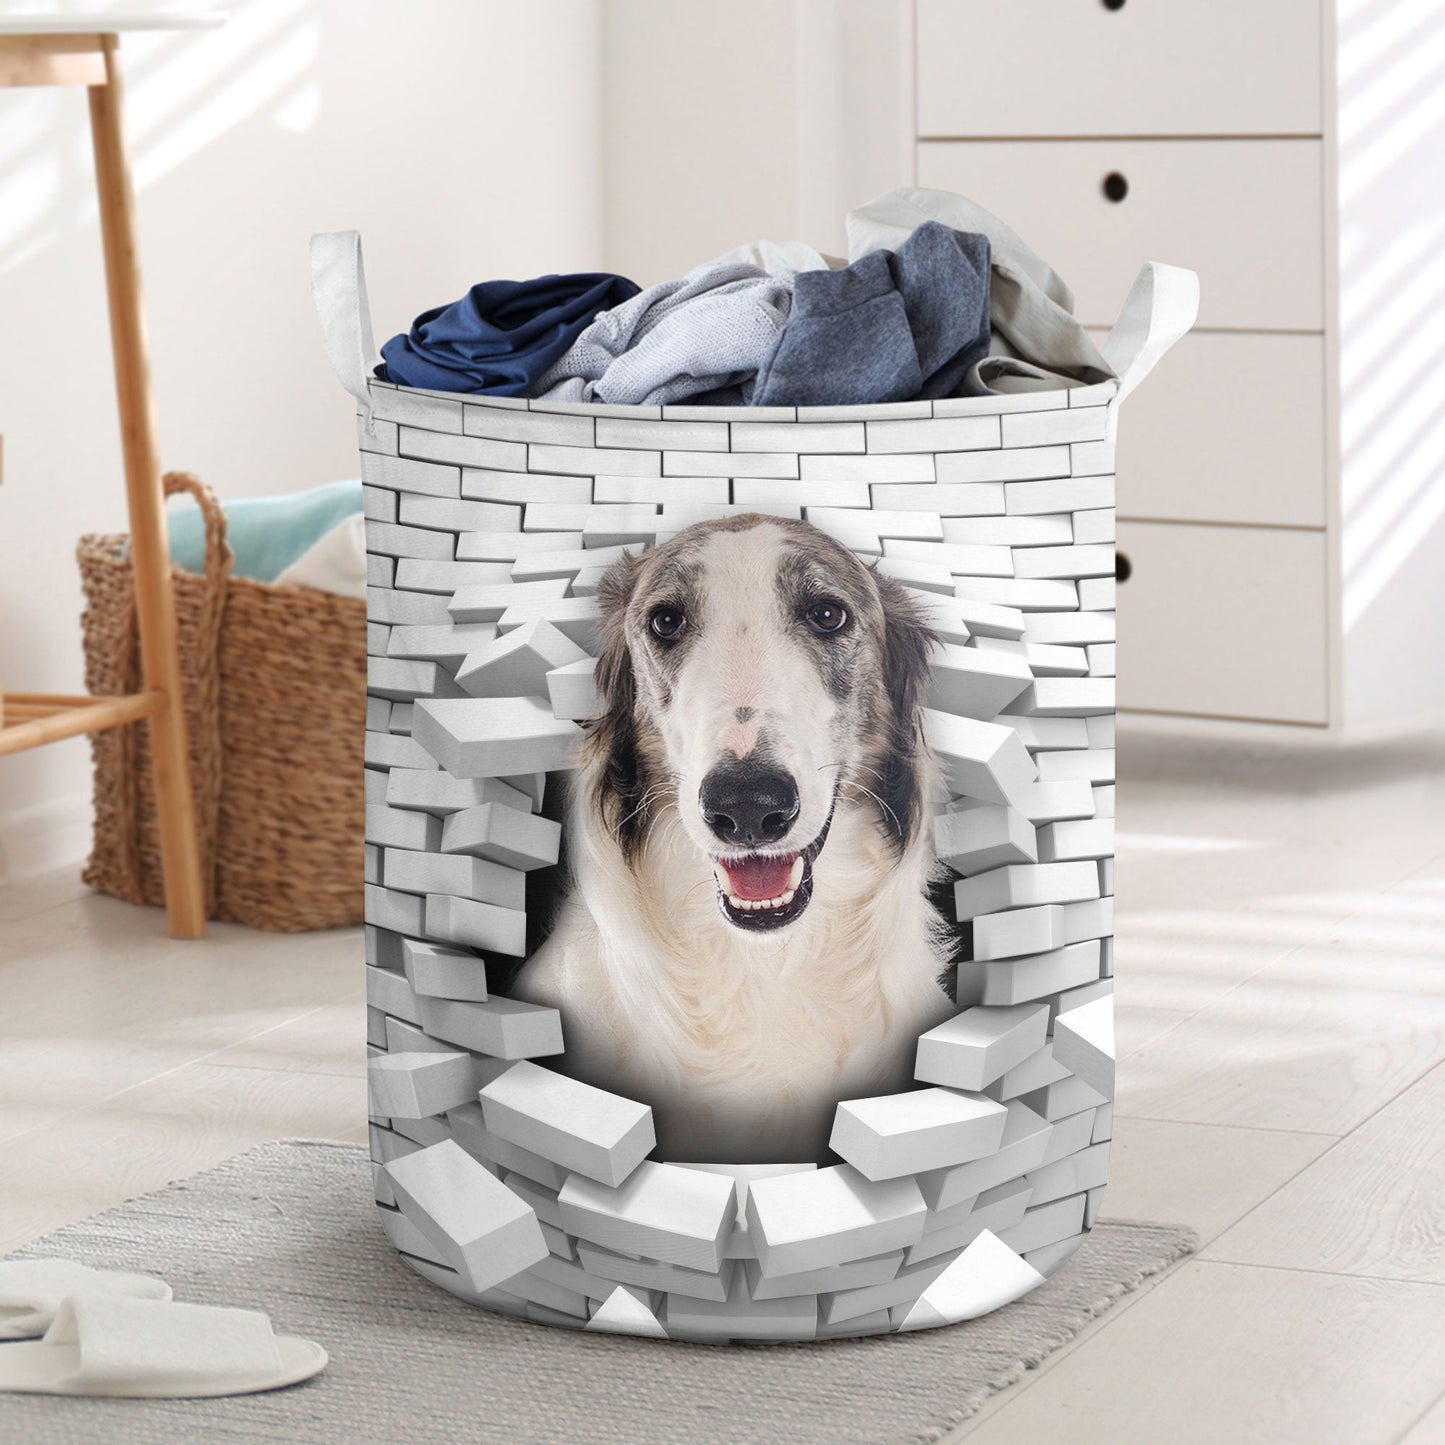 Borzoi - In The Hole Of Wall Pattern Laundry Basket